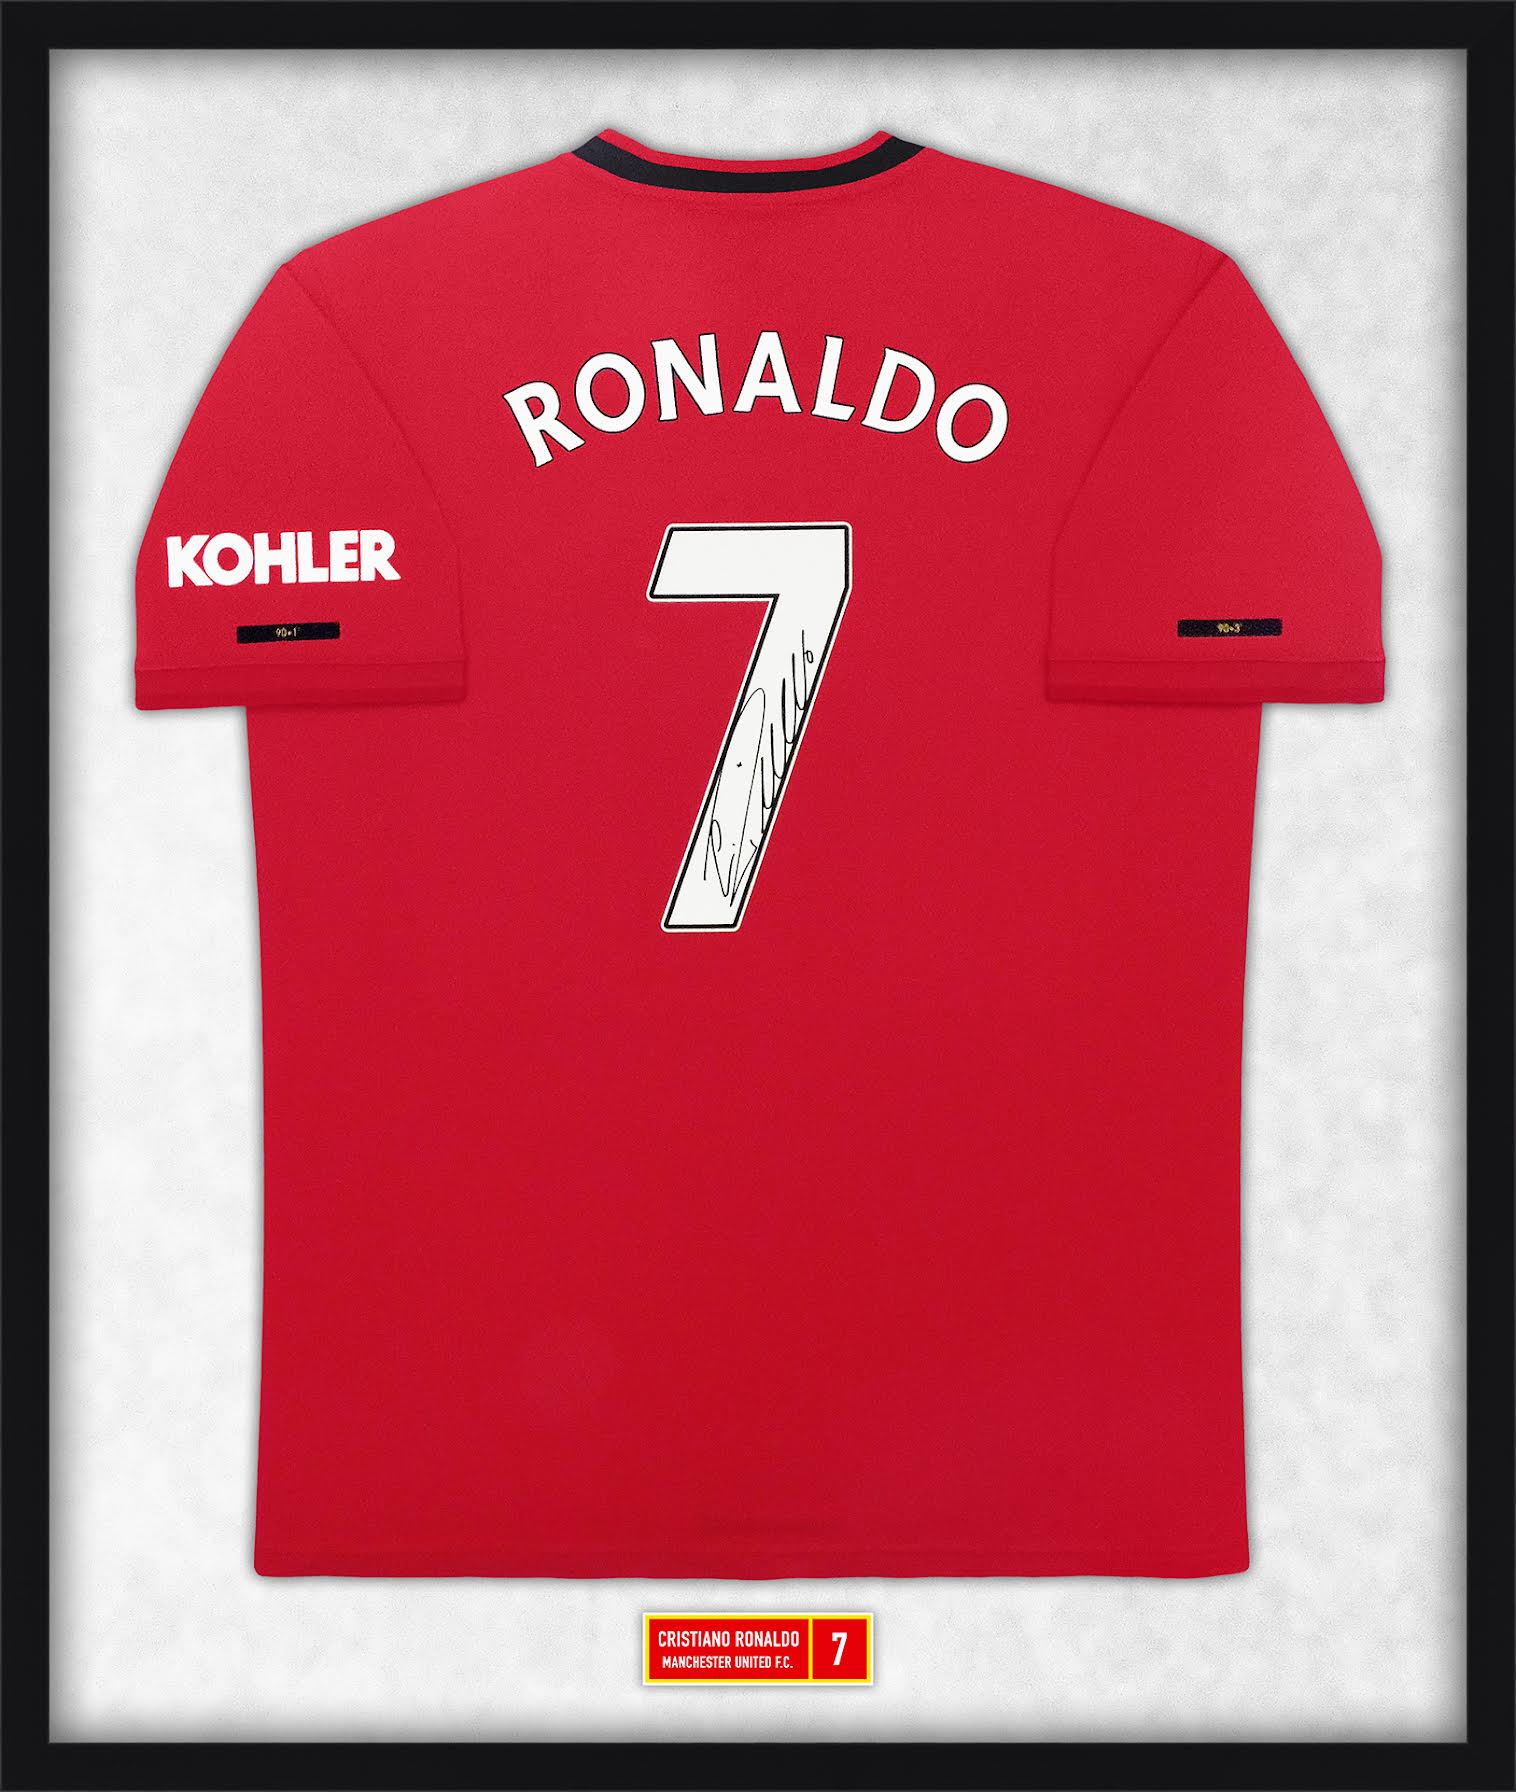 manchester united jersey price in nepal